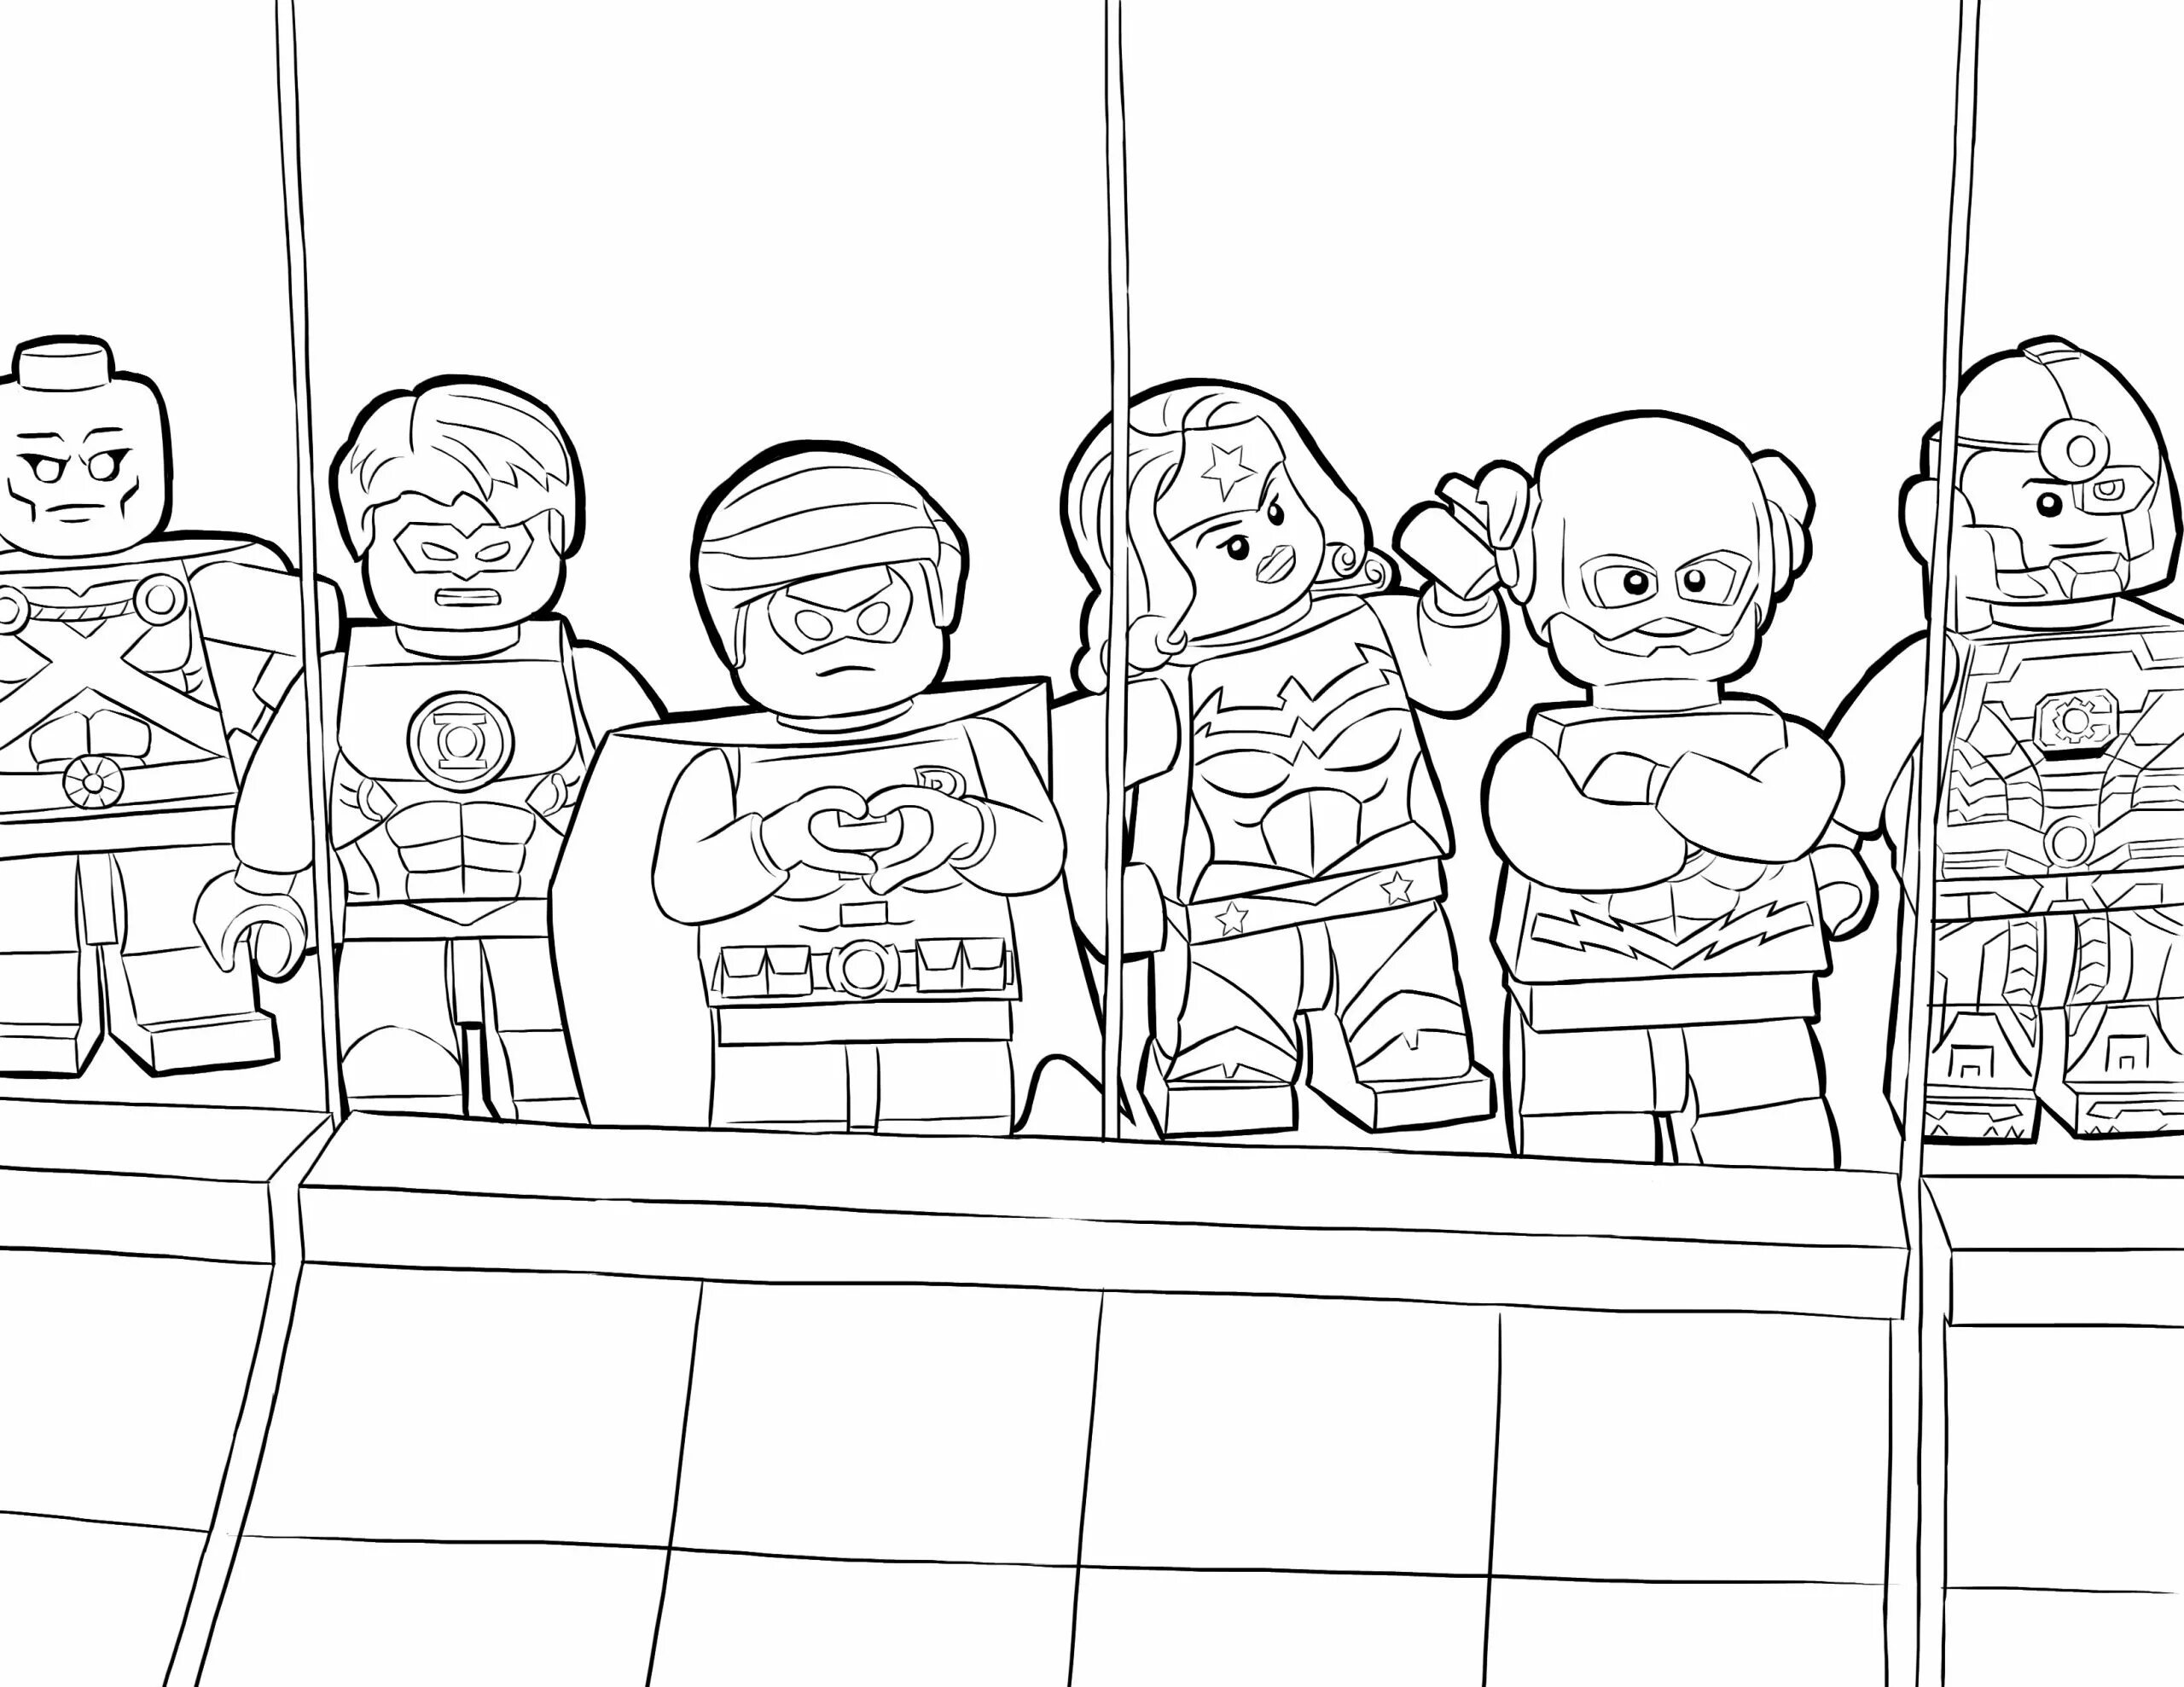 Coloring lego heroes coloring page